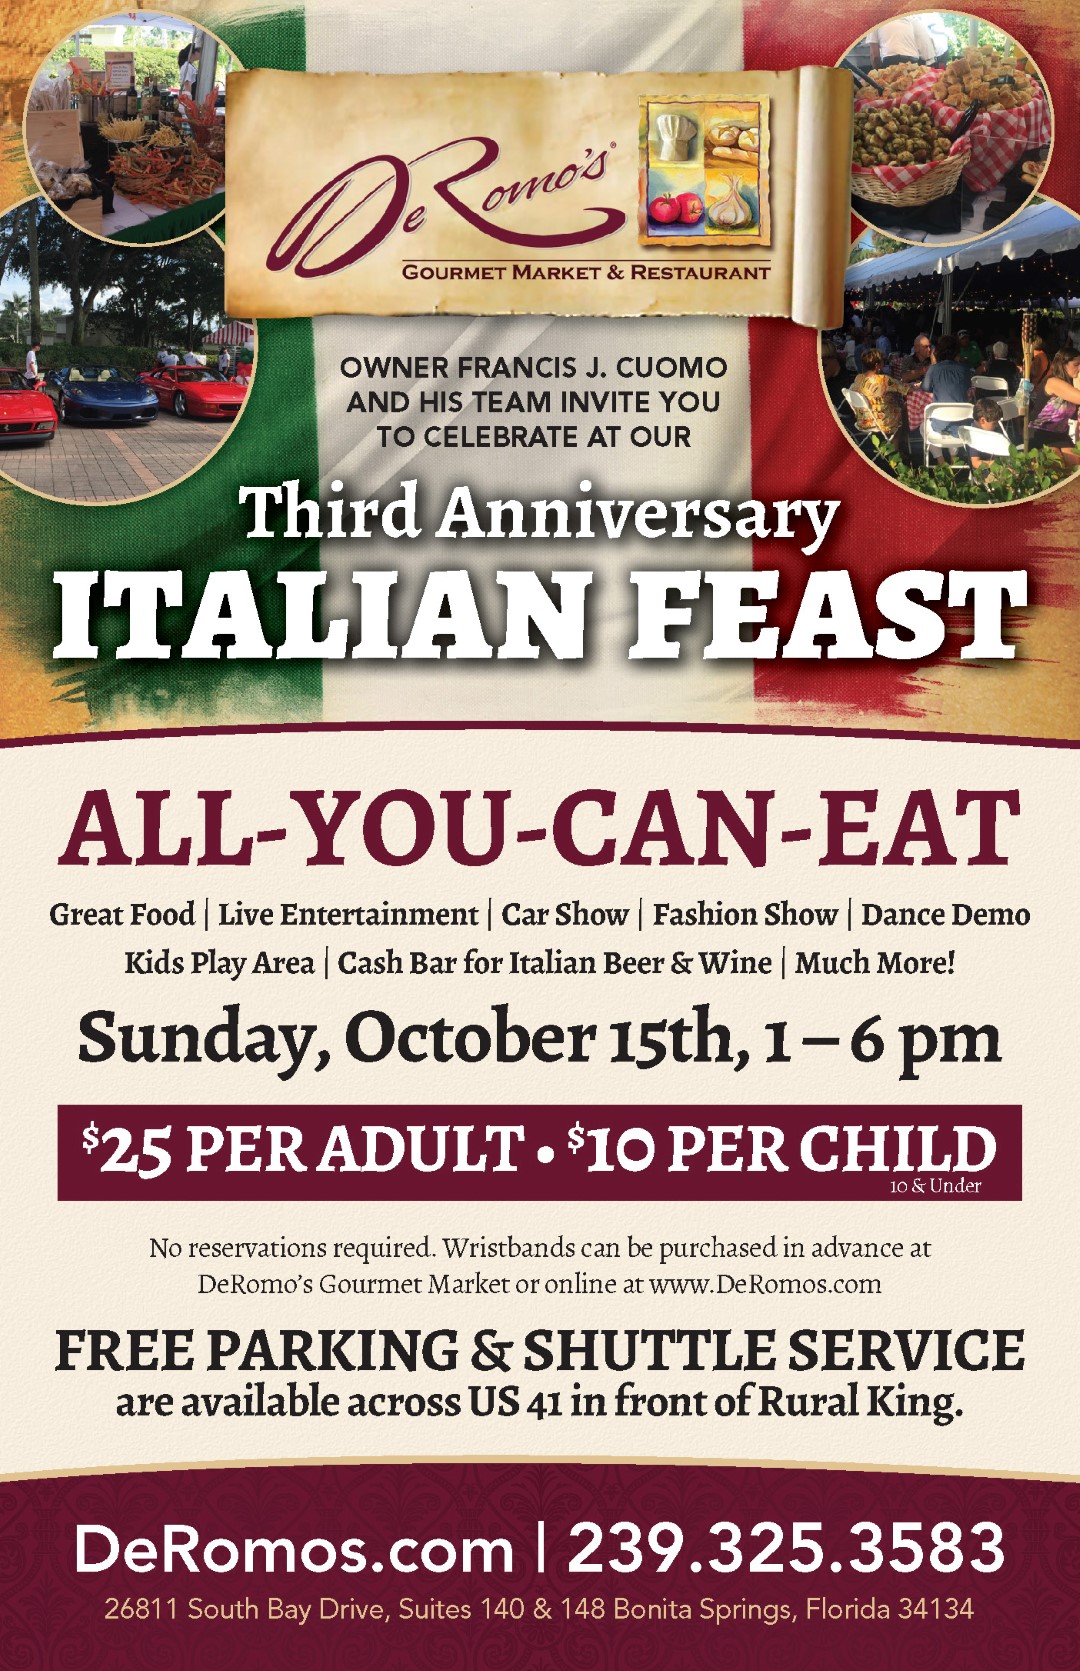 RSDR 27437 Italian Feast Flyer HR_Page_1 (Large)